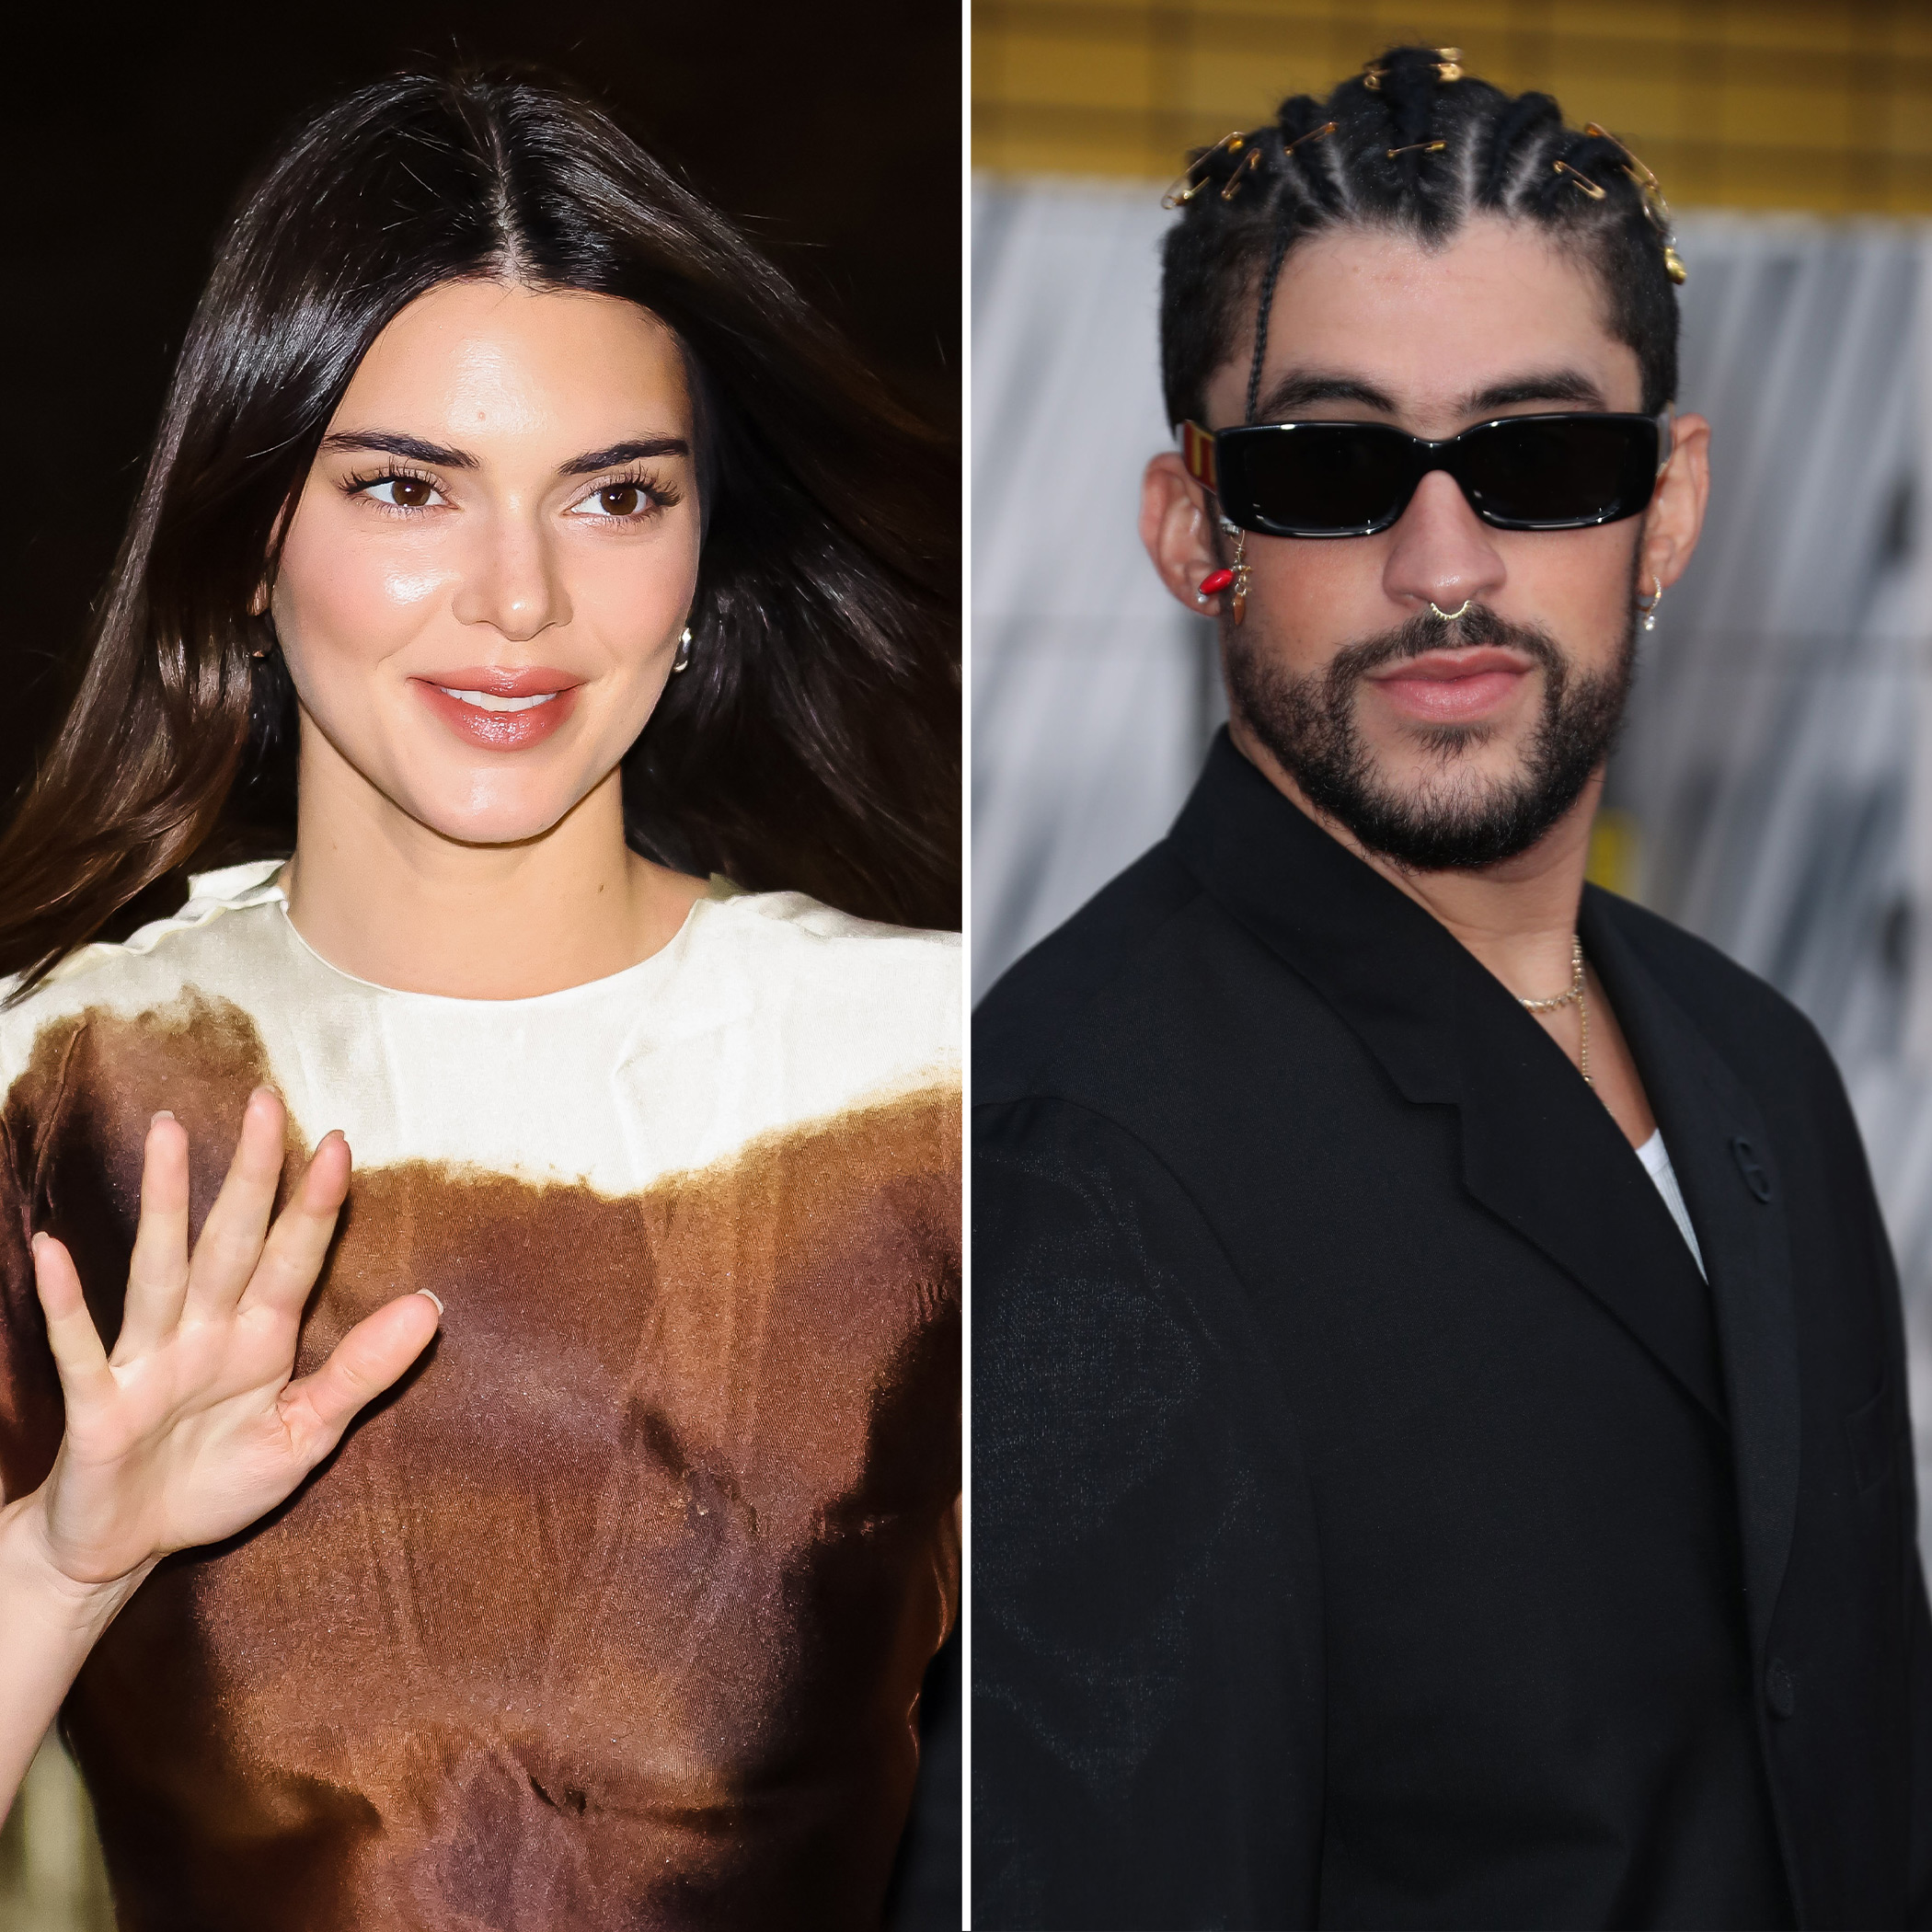 Kendall Jenner & Bad Bunny Might Have Confirmed Their Relationship